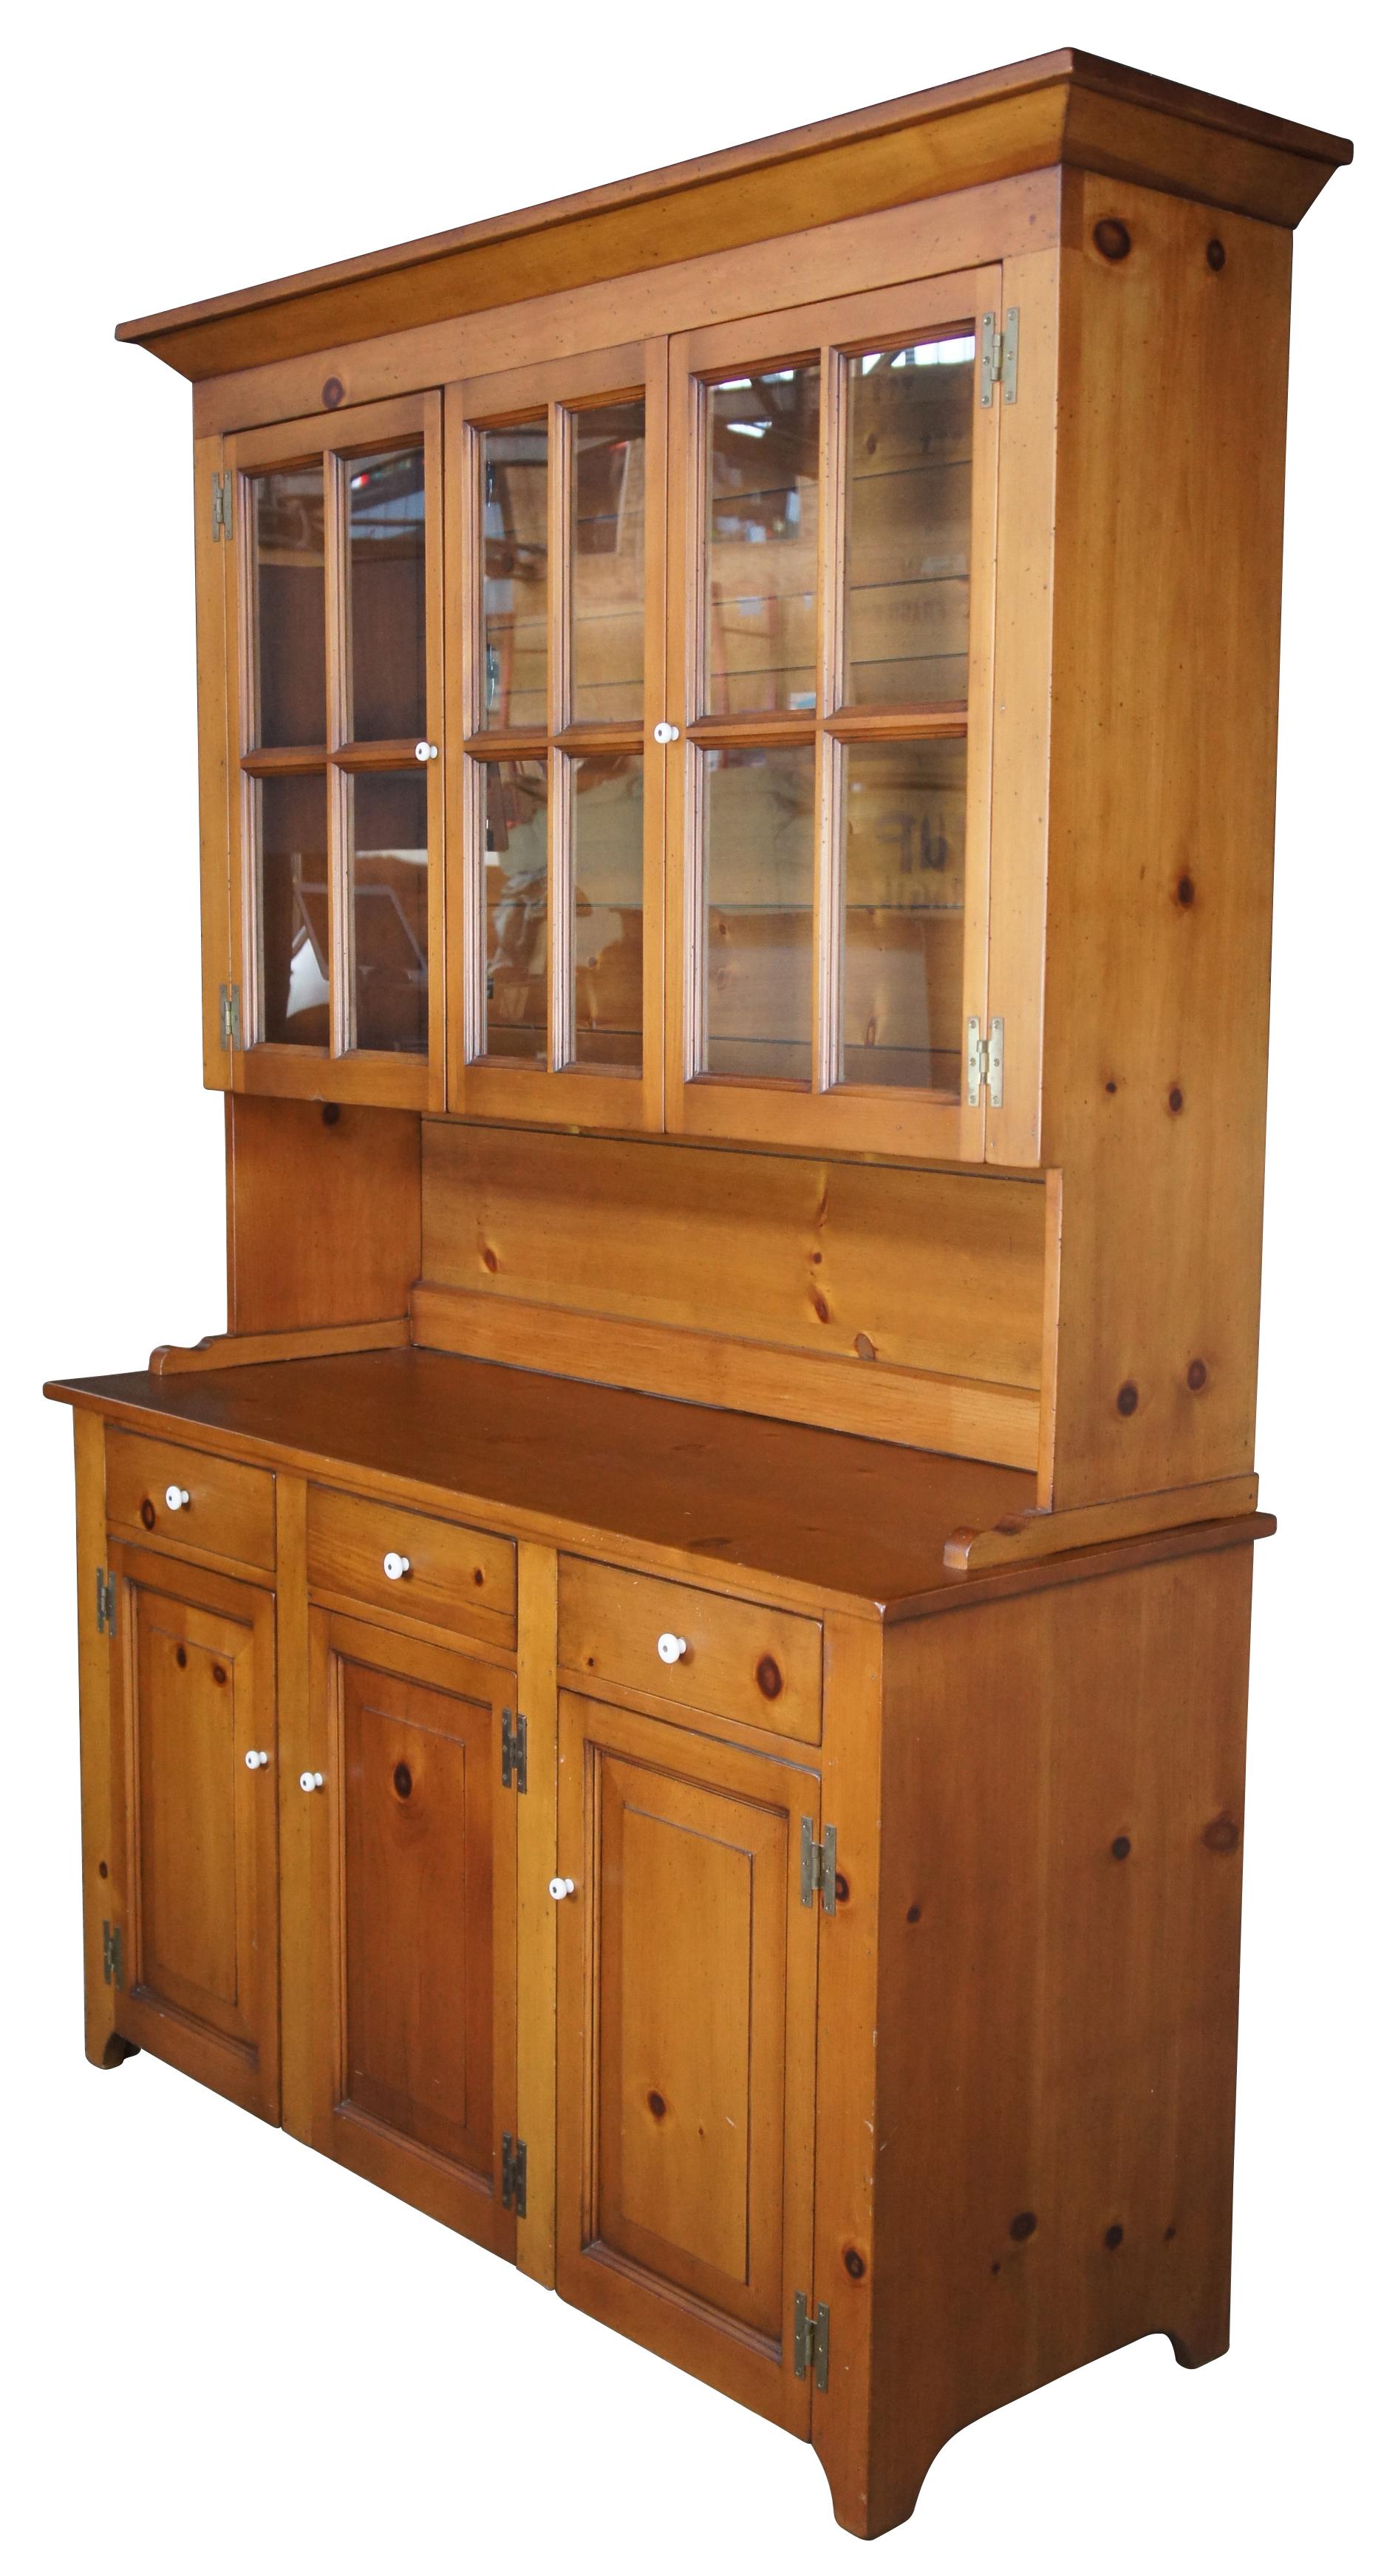 Circa 1970s Stepback cupboard in the manner of Pennsylvannia Dutch. Handmade by Jay Albers of the Early American Shop in Kettering Ohio. Jay was born in Cincinnati and moved to Dayton in the 1960s to open the Early American Shop. His primitive